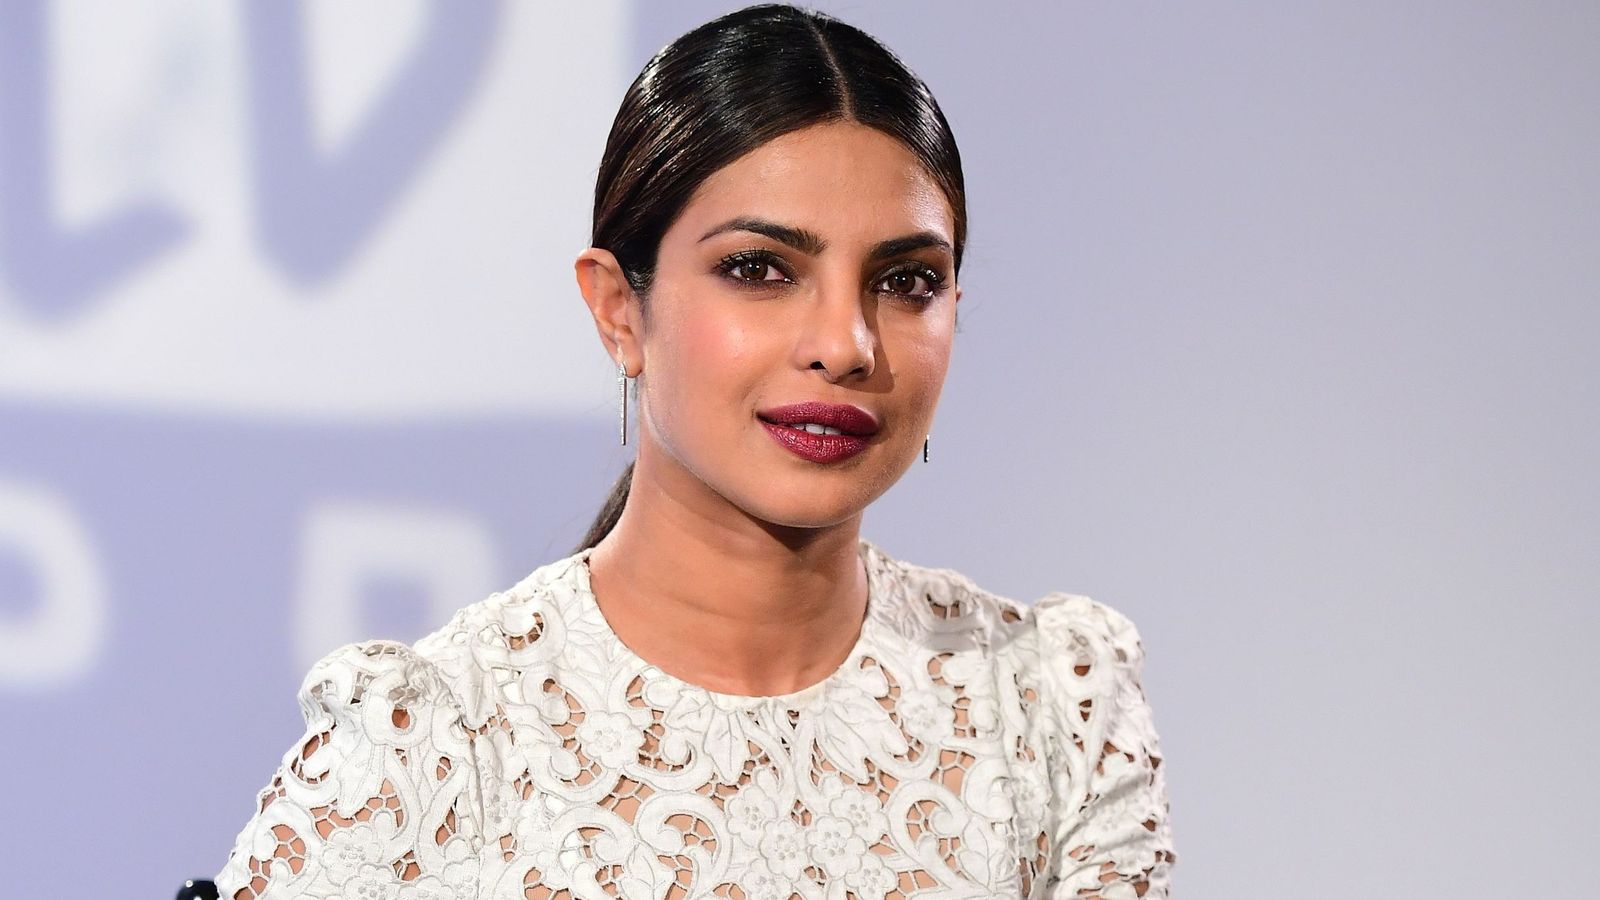 20 Years Of Priyanka Chopra: Actress Shares Fanmade Video On Completing Two Decades In Entertainment Industry